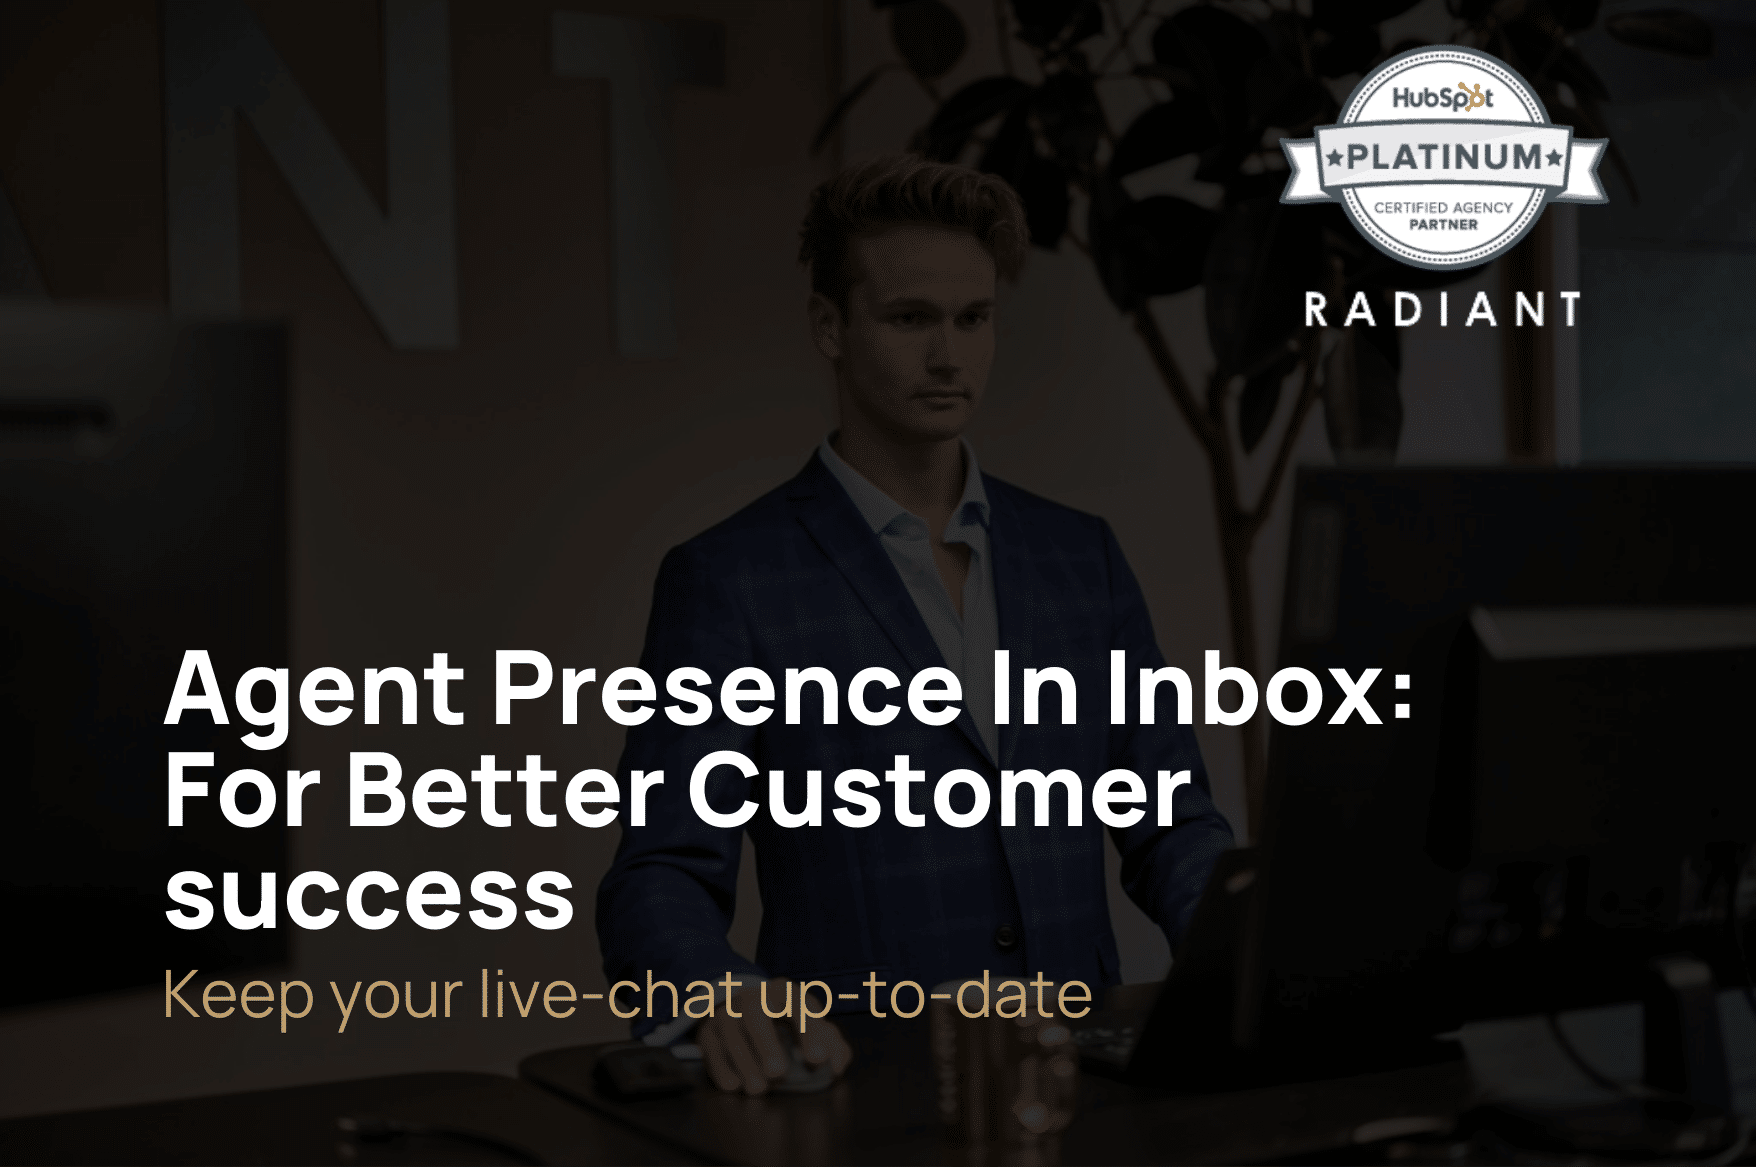 Agent Presence In Inbox: For Better Customer success